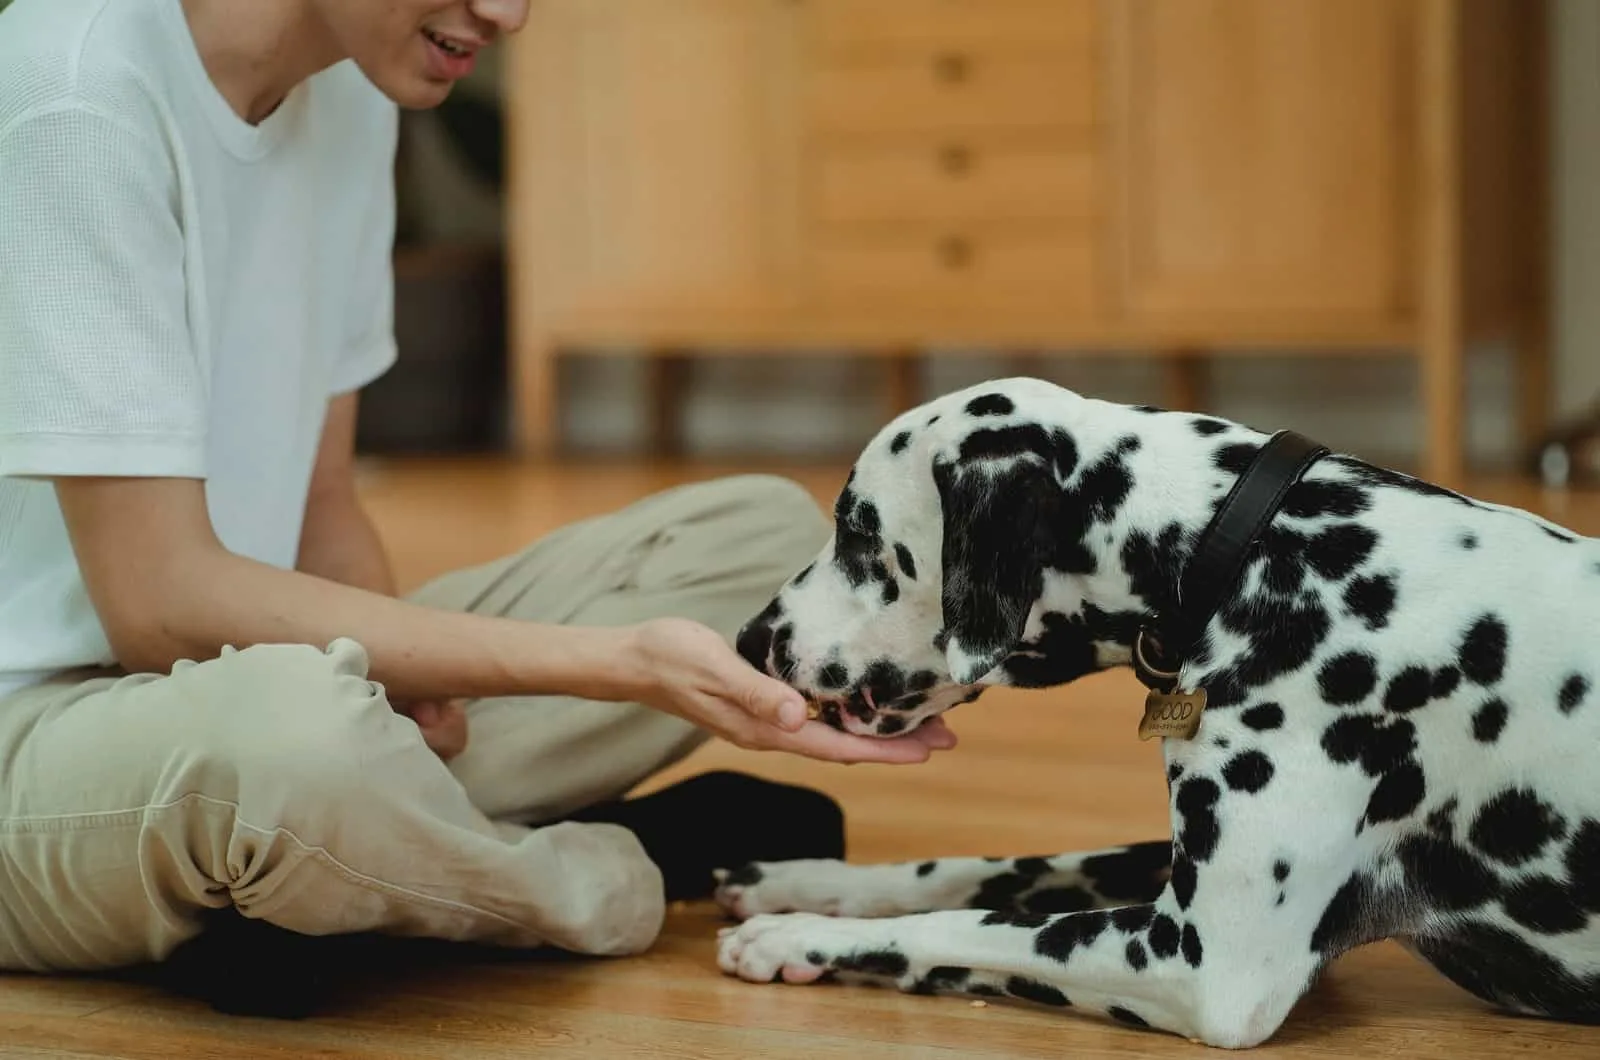 dalmatian eating from owner's hand